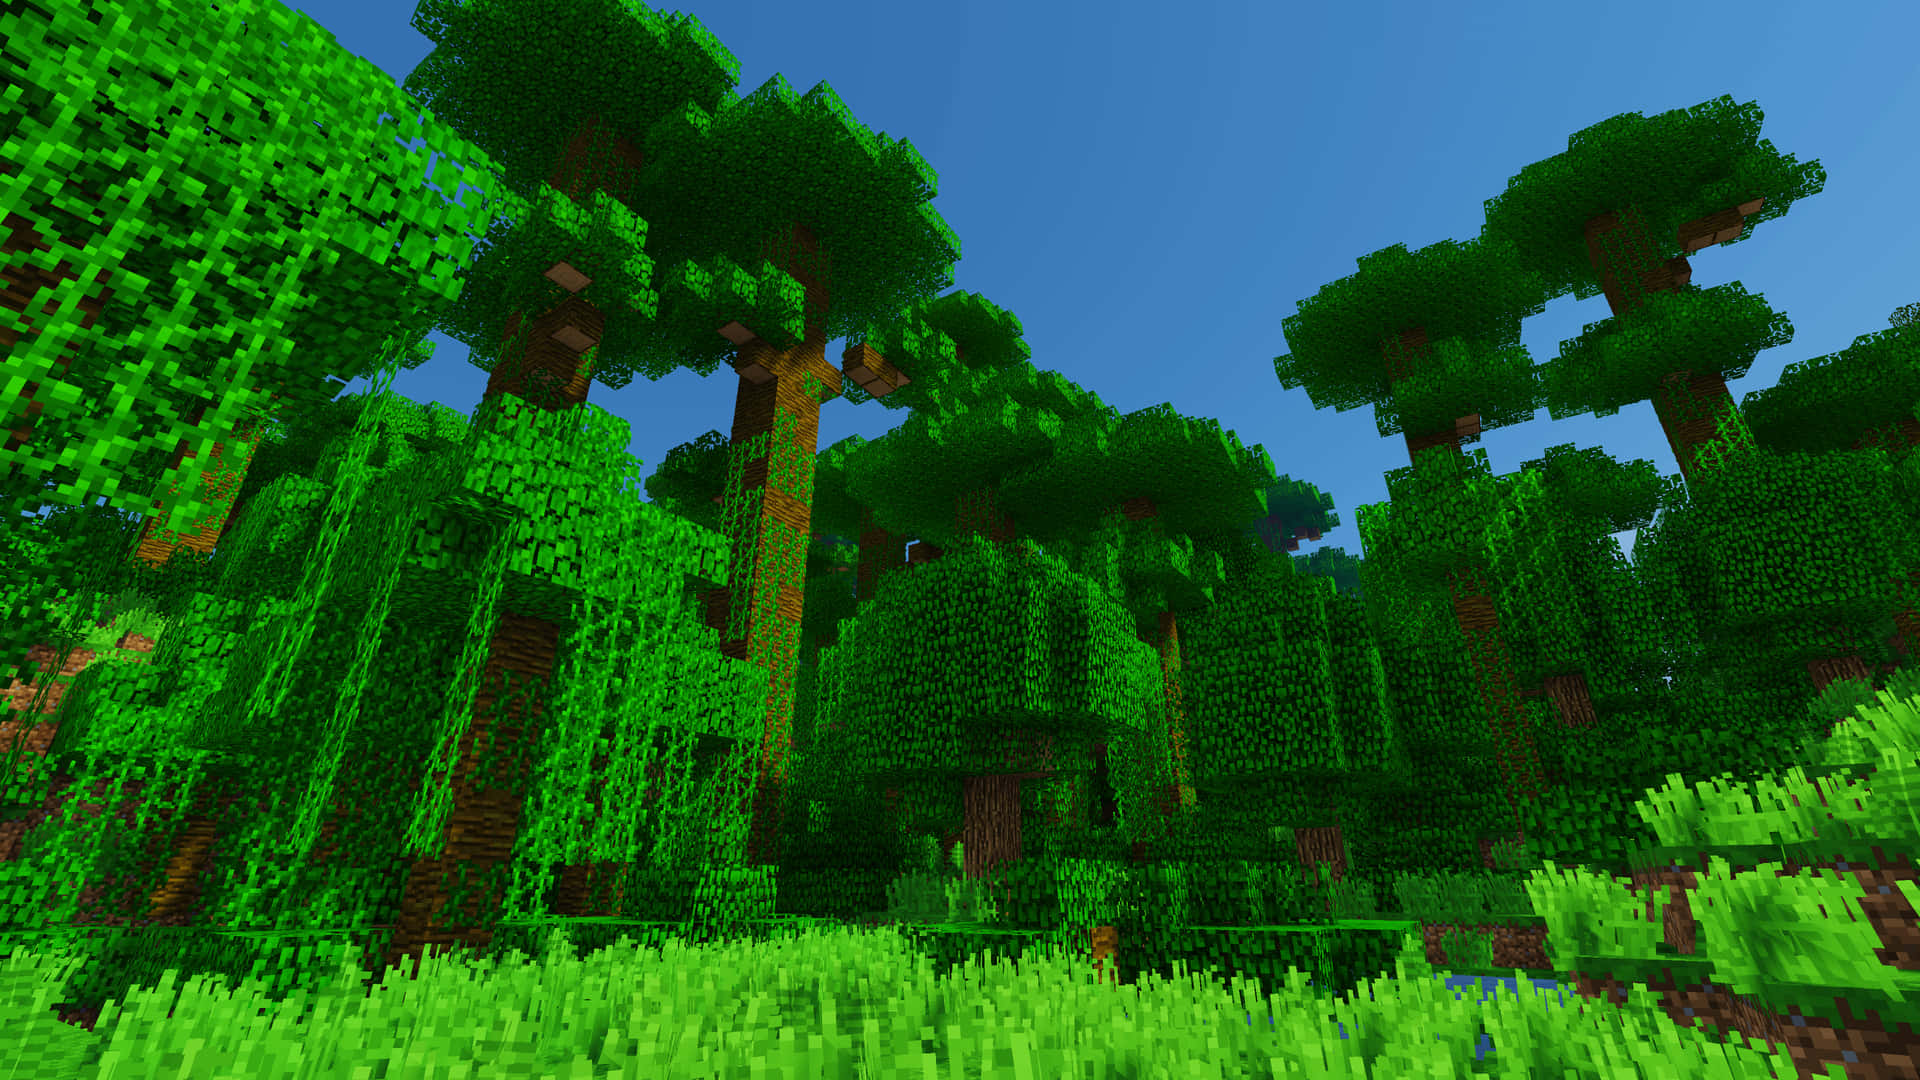 A field of bright green Minecraft grass surrounded by a winding river. Wallpaper